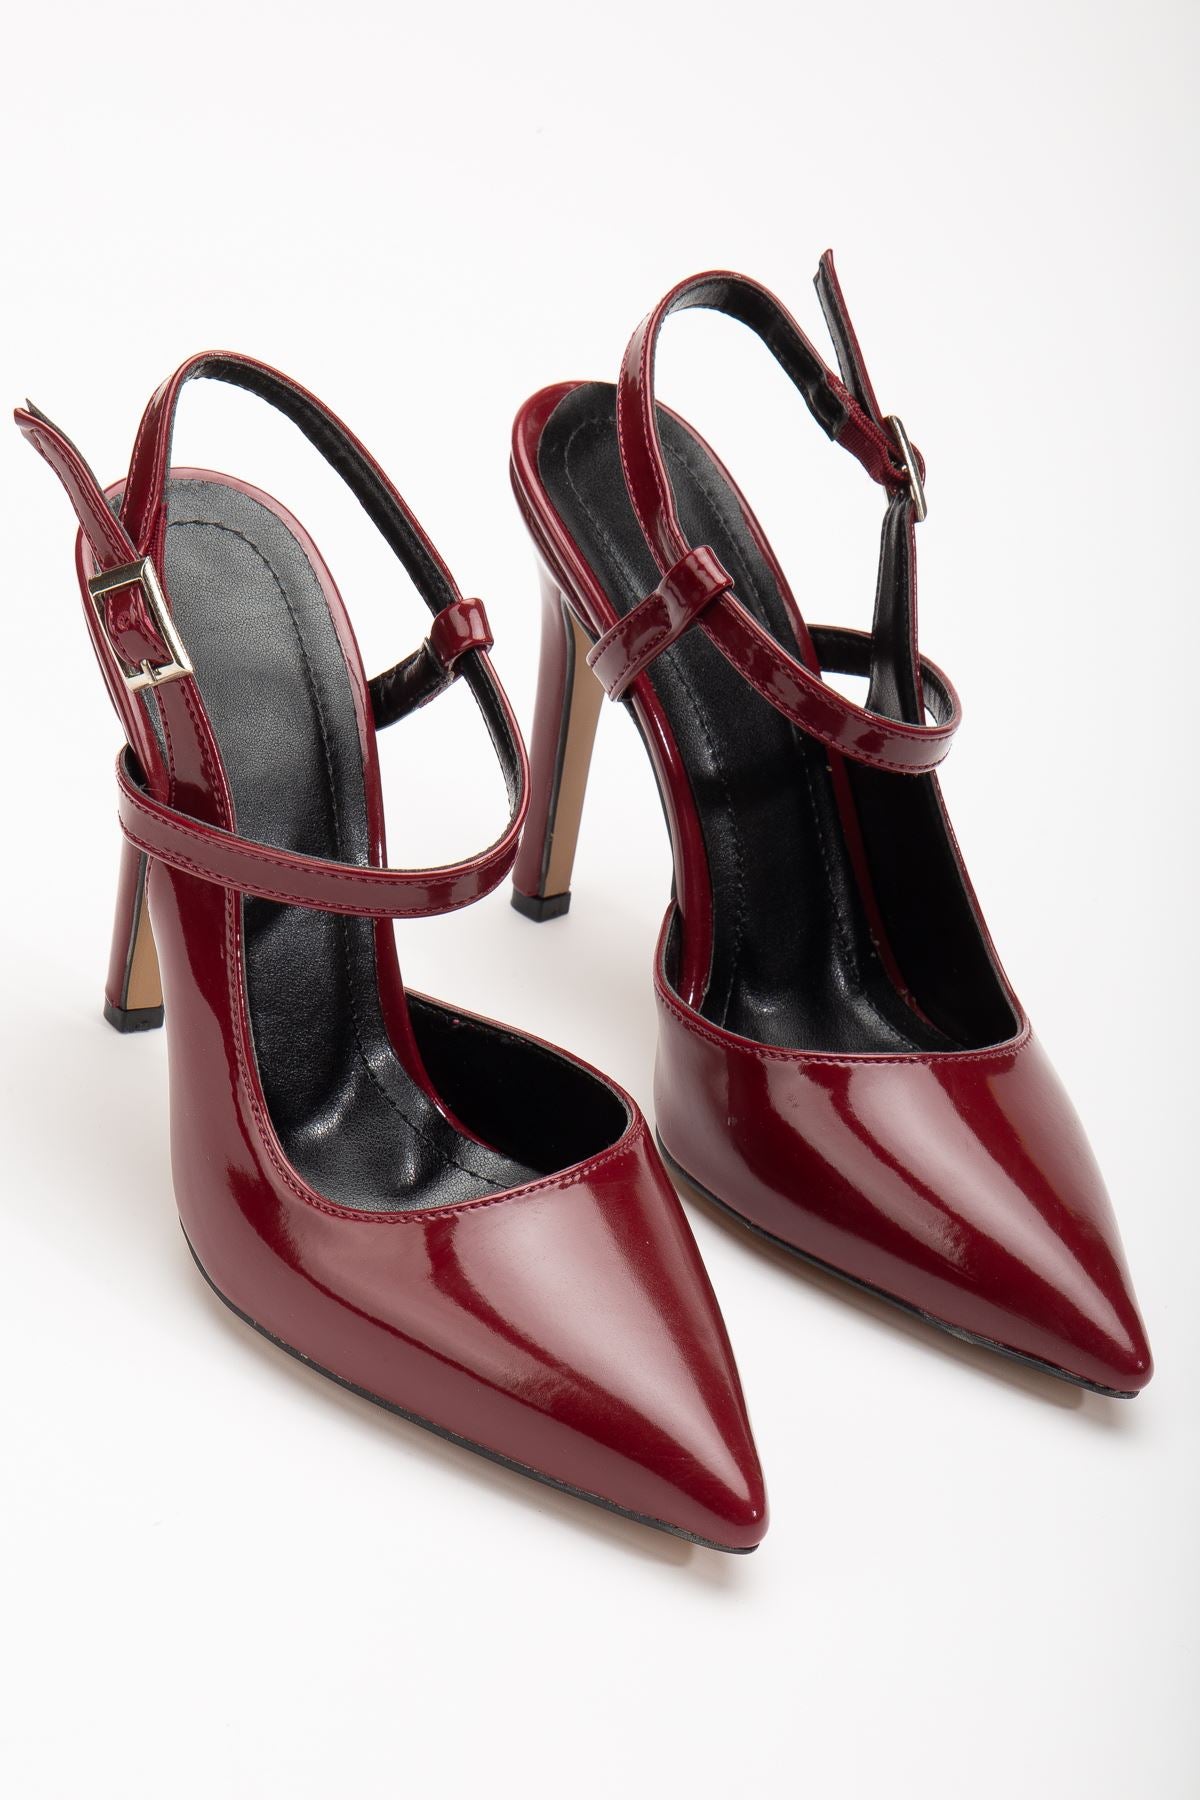 Nely Claret Red Patent Leather Pointed Women's Heeled Shoes - STREETMODE™